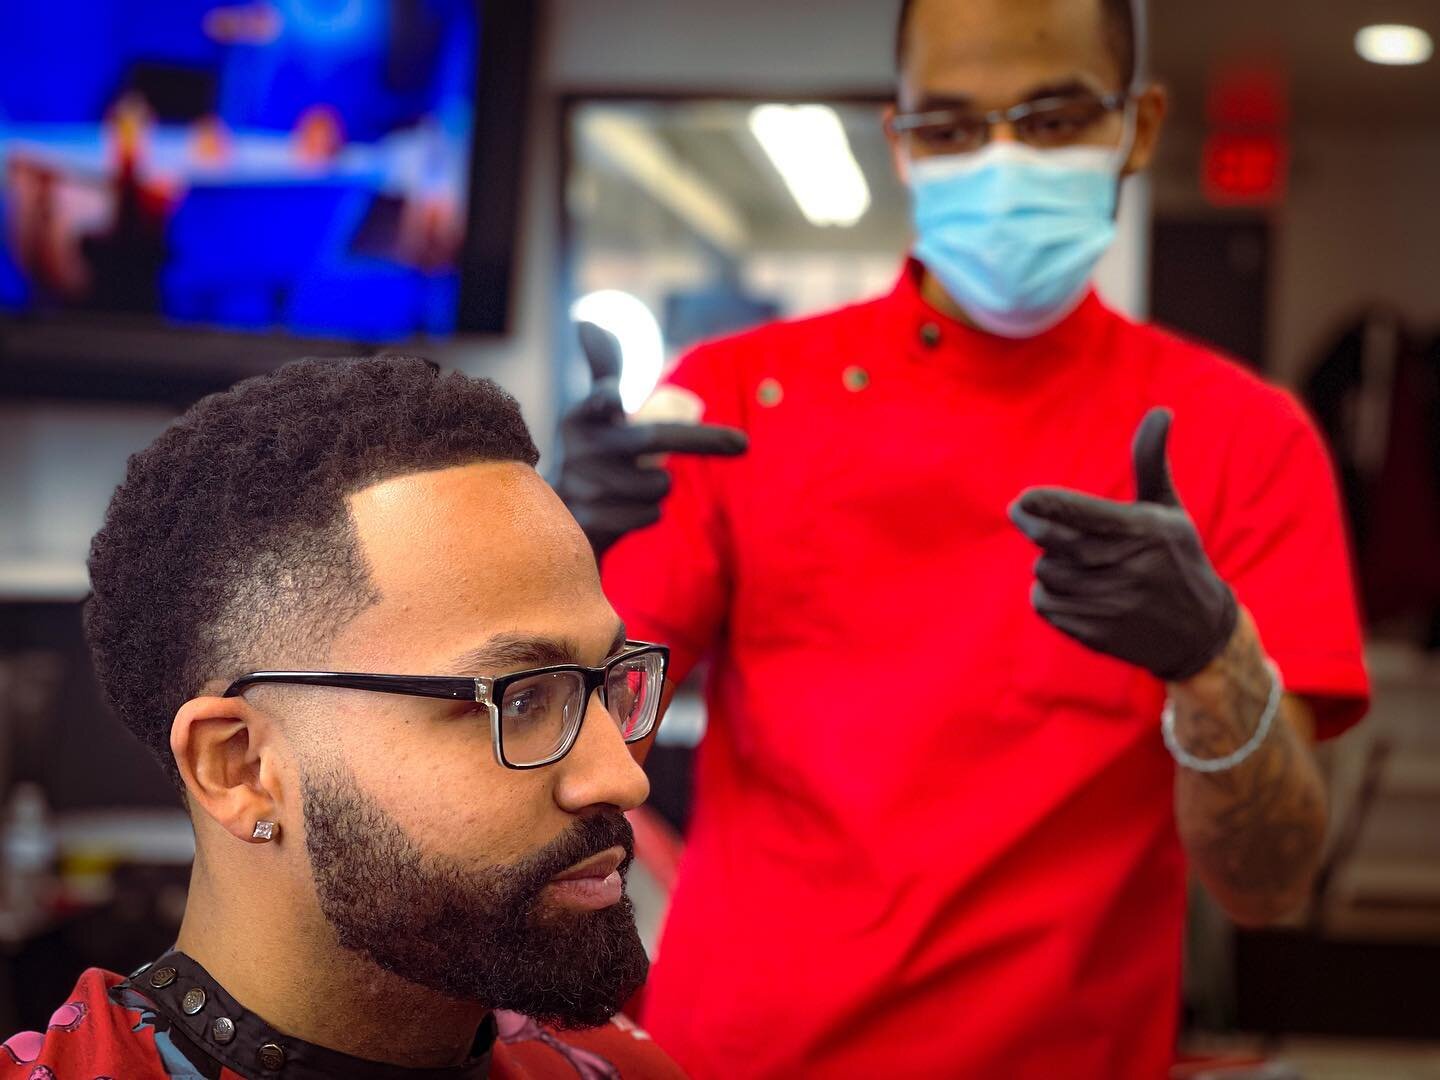 Book your next appointment today
@laceandblaze got busy on this cut!!!

#bestbarber #taperfade #haircut #longislandbarber #ny #barbershop #fyp #explorepage